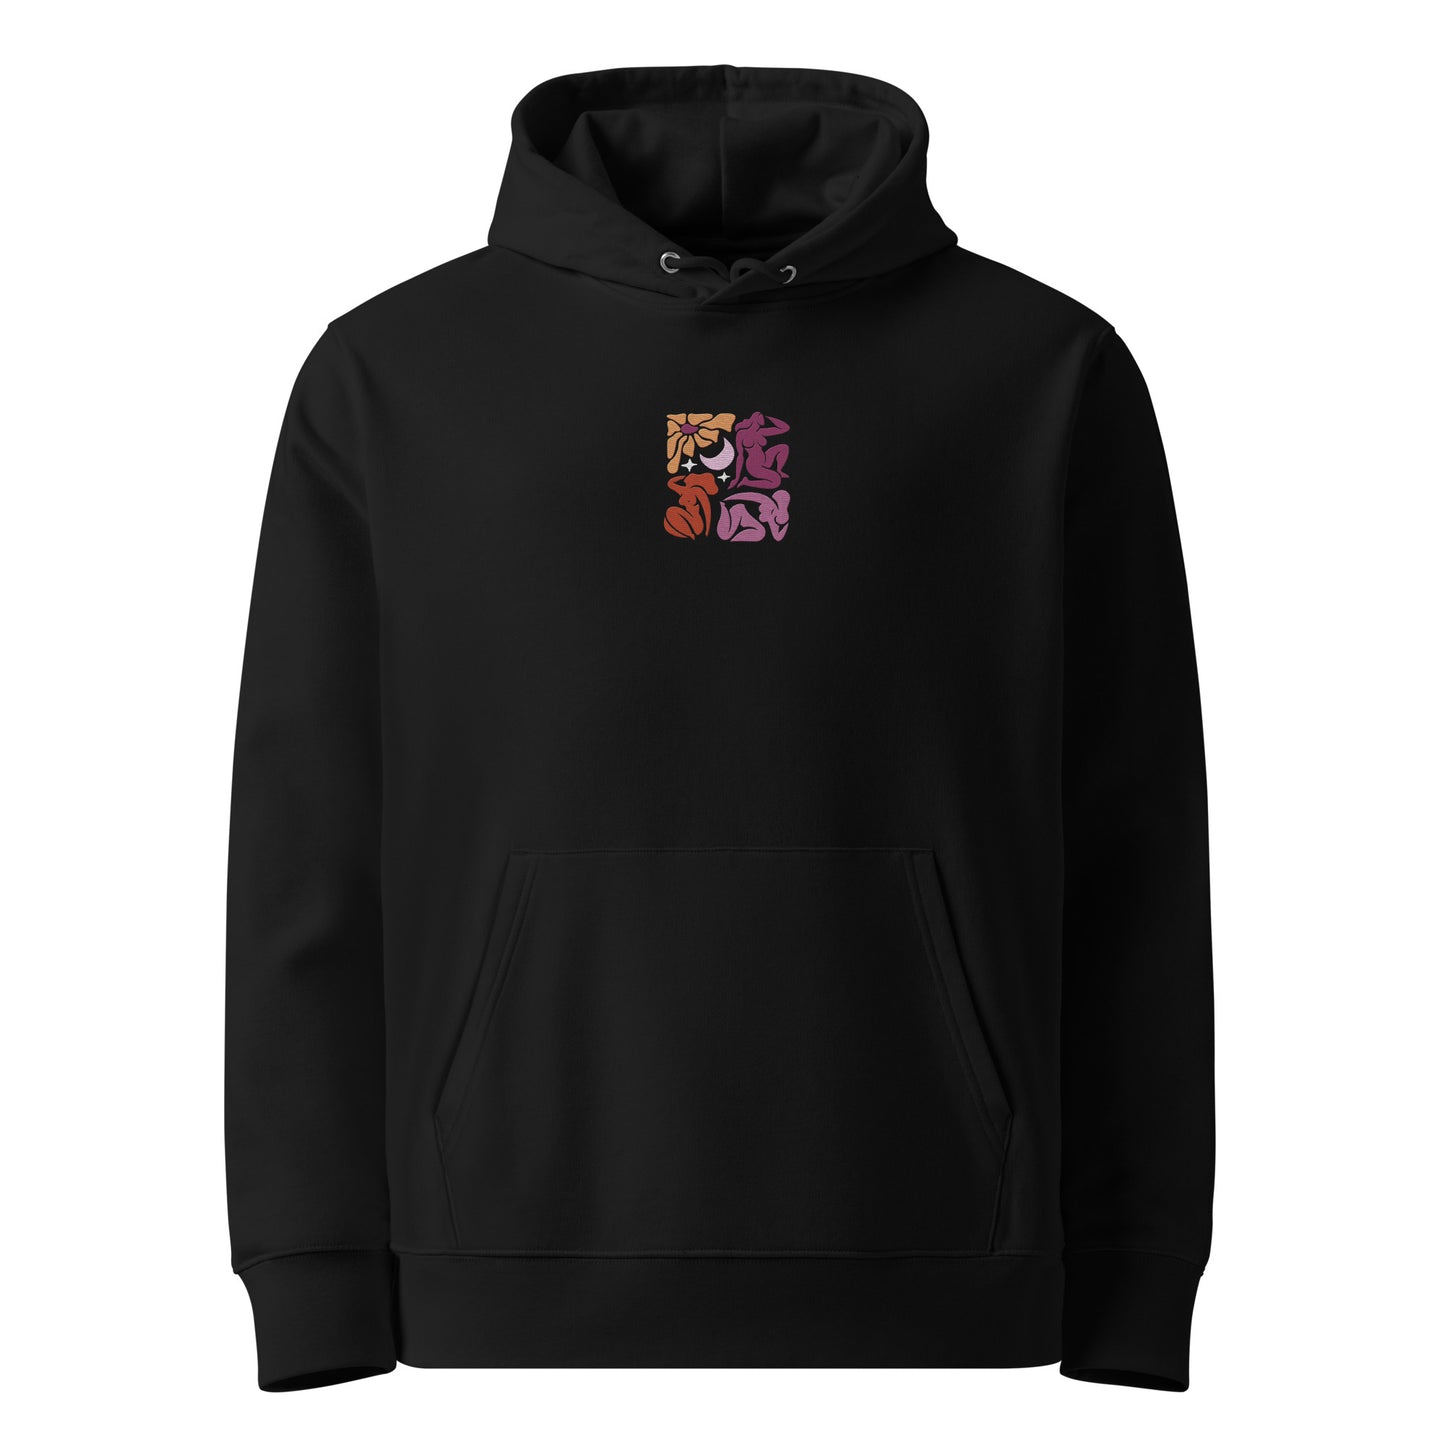 Unisex eco-friendly black hoodie featuring an embroidered Matisse mosaic-inspired design centered chest in lesbian colors, with the same design printed large on the back - adding a touch of lgbtq to your outfit. sizes: small, medium, large, extra large, double extra large.